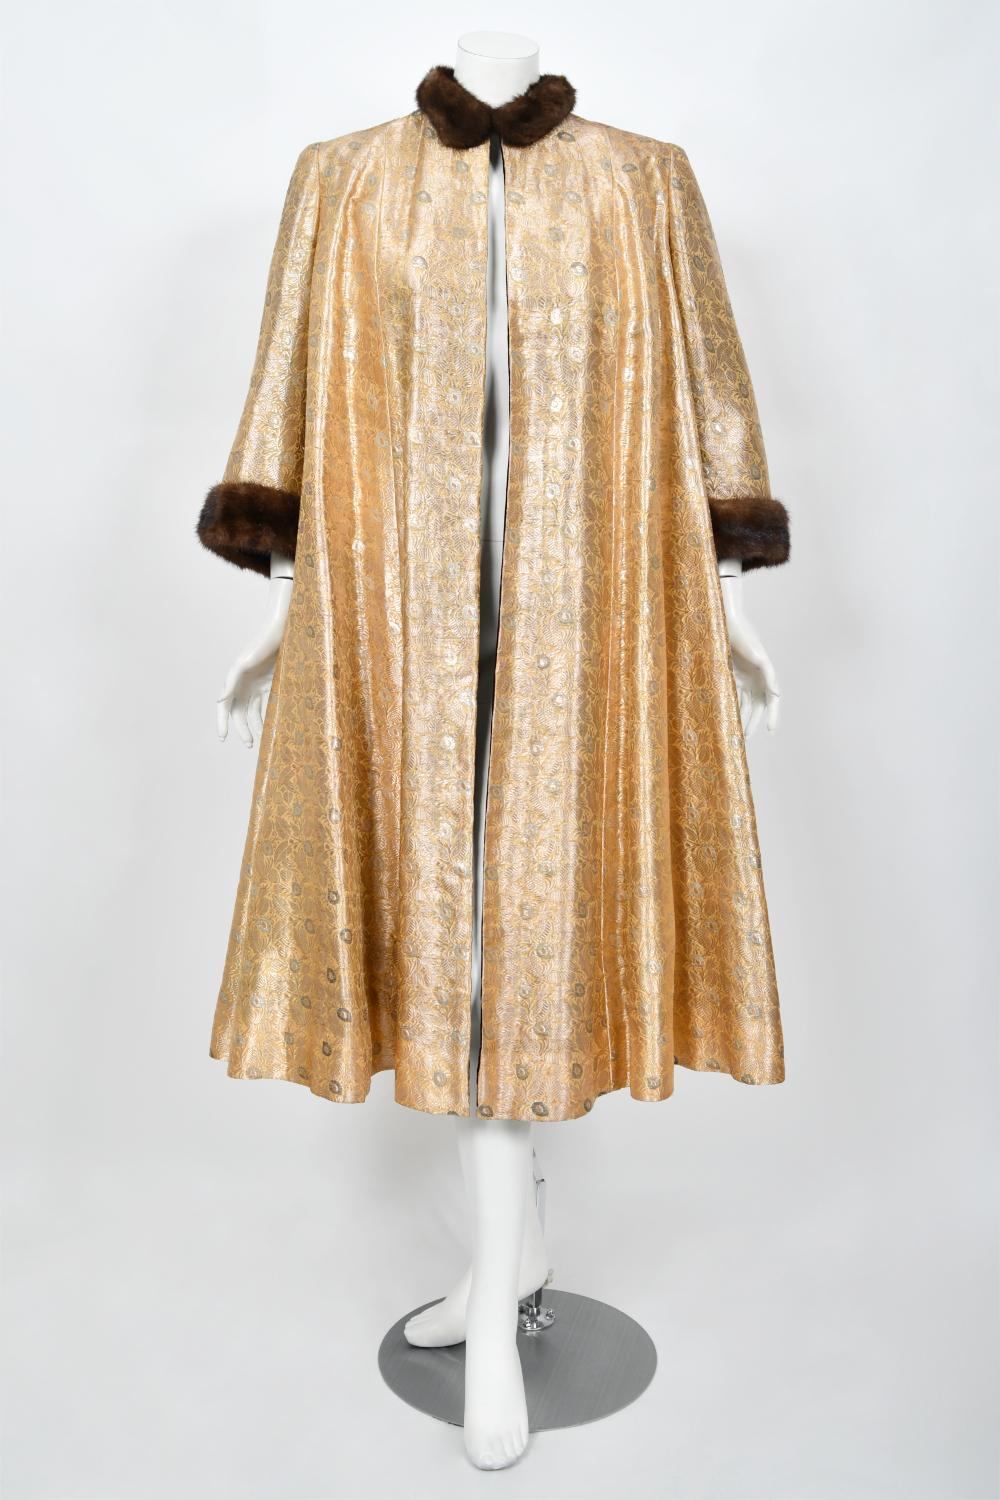 1949 Traina-Norell Couture Vogue Documented Metallic Gold Silk & Mink Swing Coat For Sale 7